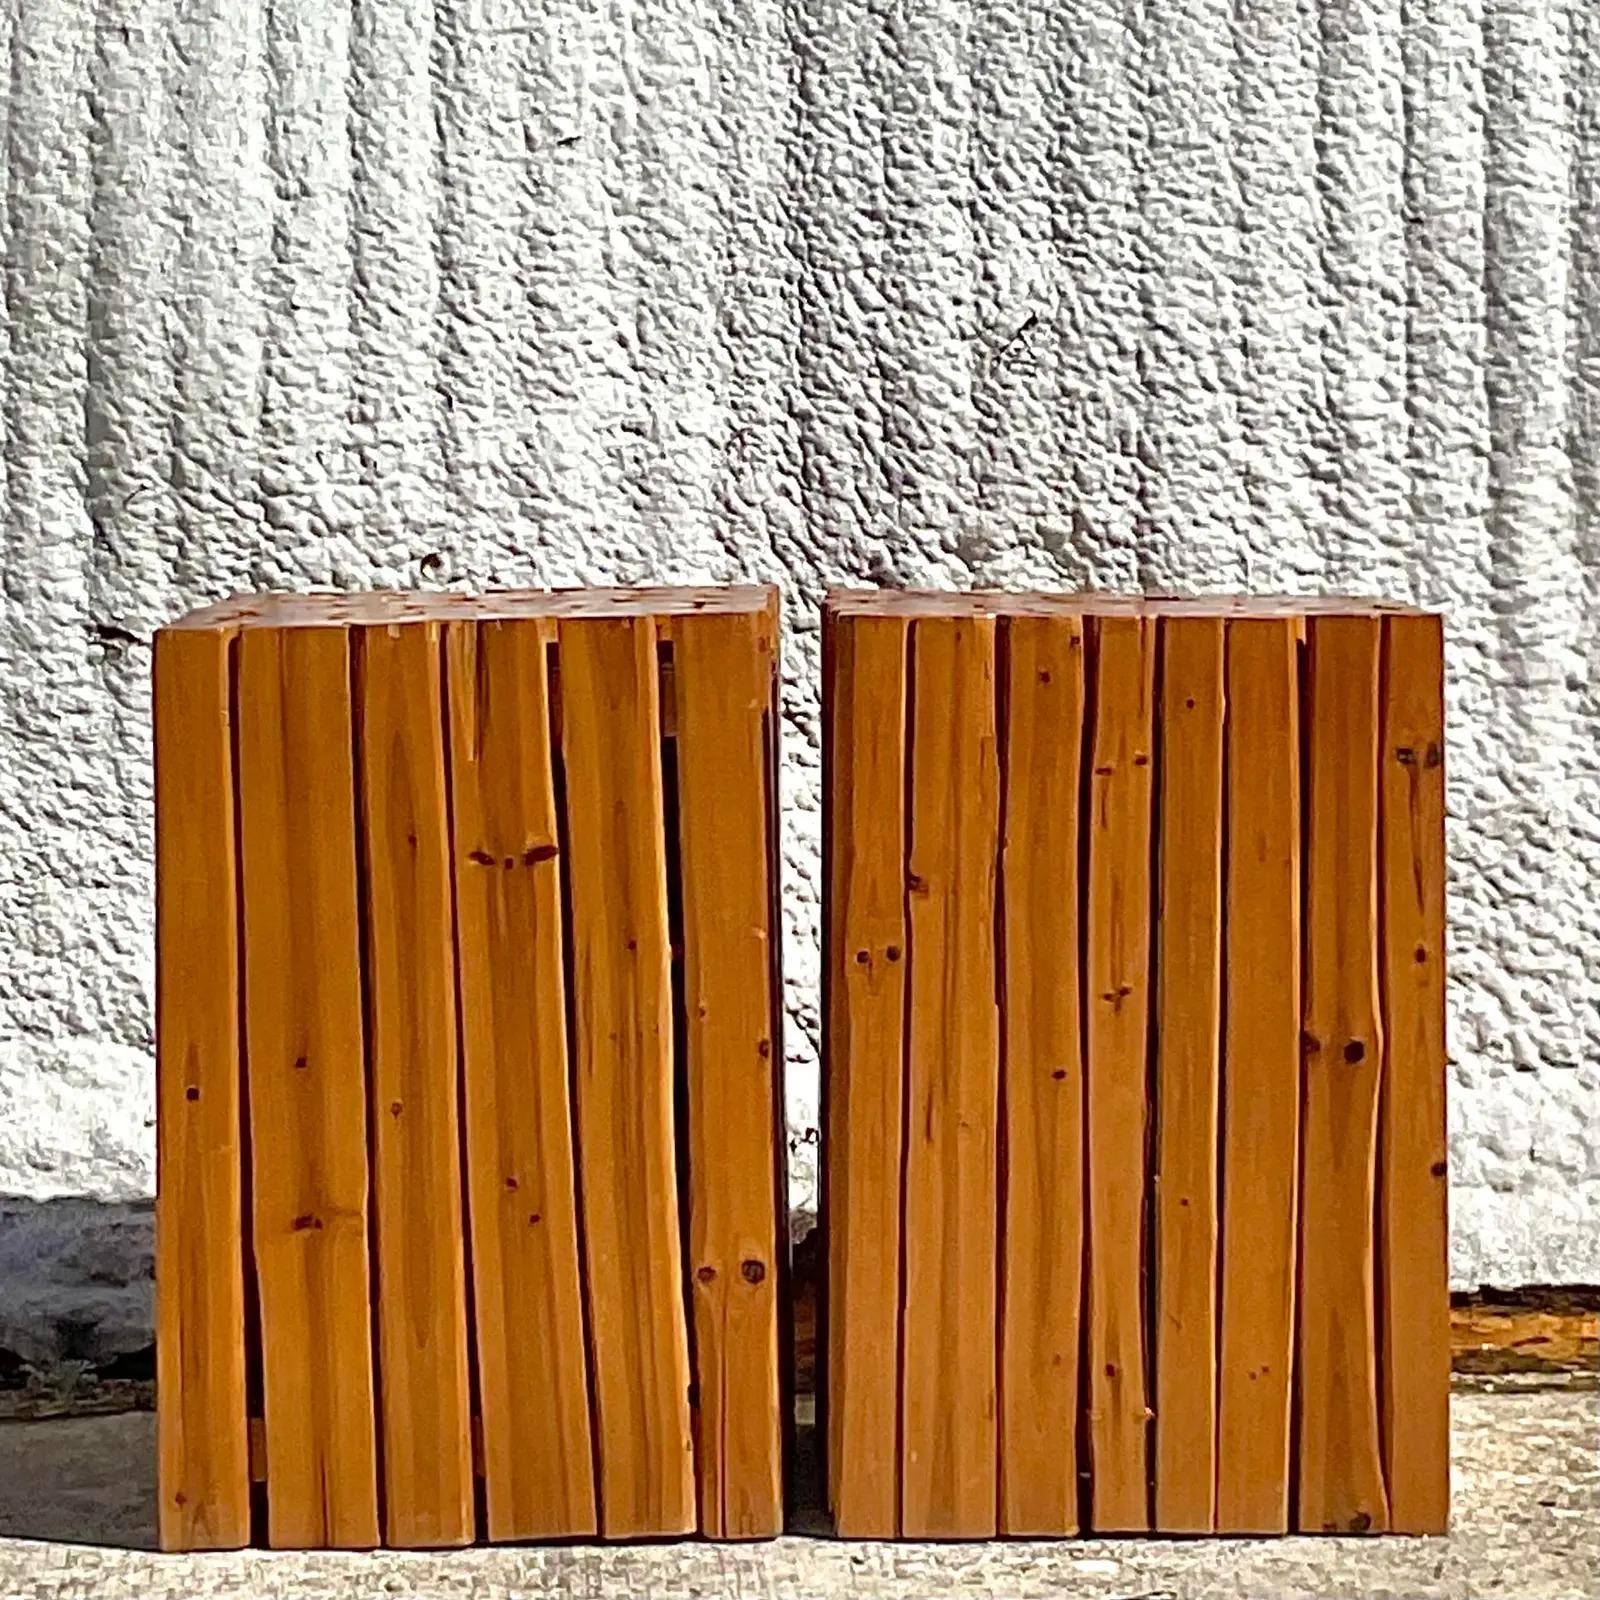 A fabulous pair of vintage Boho side tables. Beautiful bundle of sticks in a chic block design. Perfect as side tables or even as cool sculpture pedestals. You decide! Add glass for a more polished look. Acquired from a Palm Beach estate.